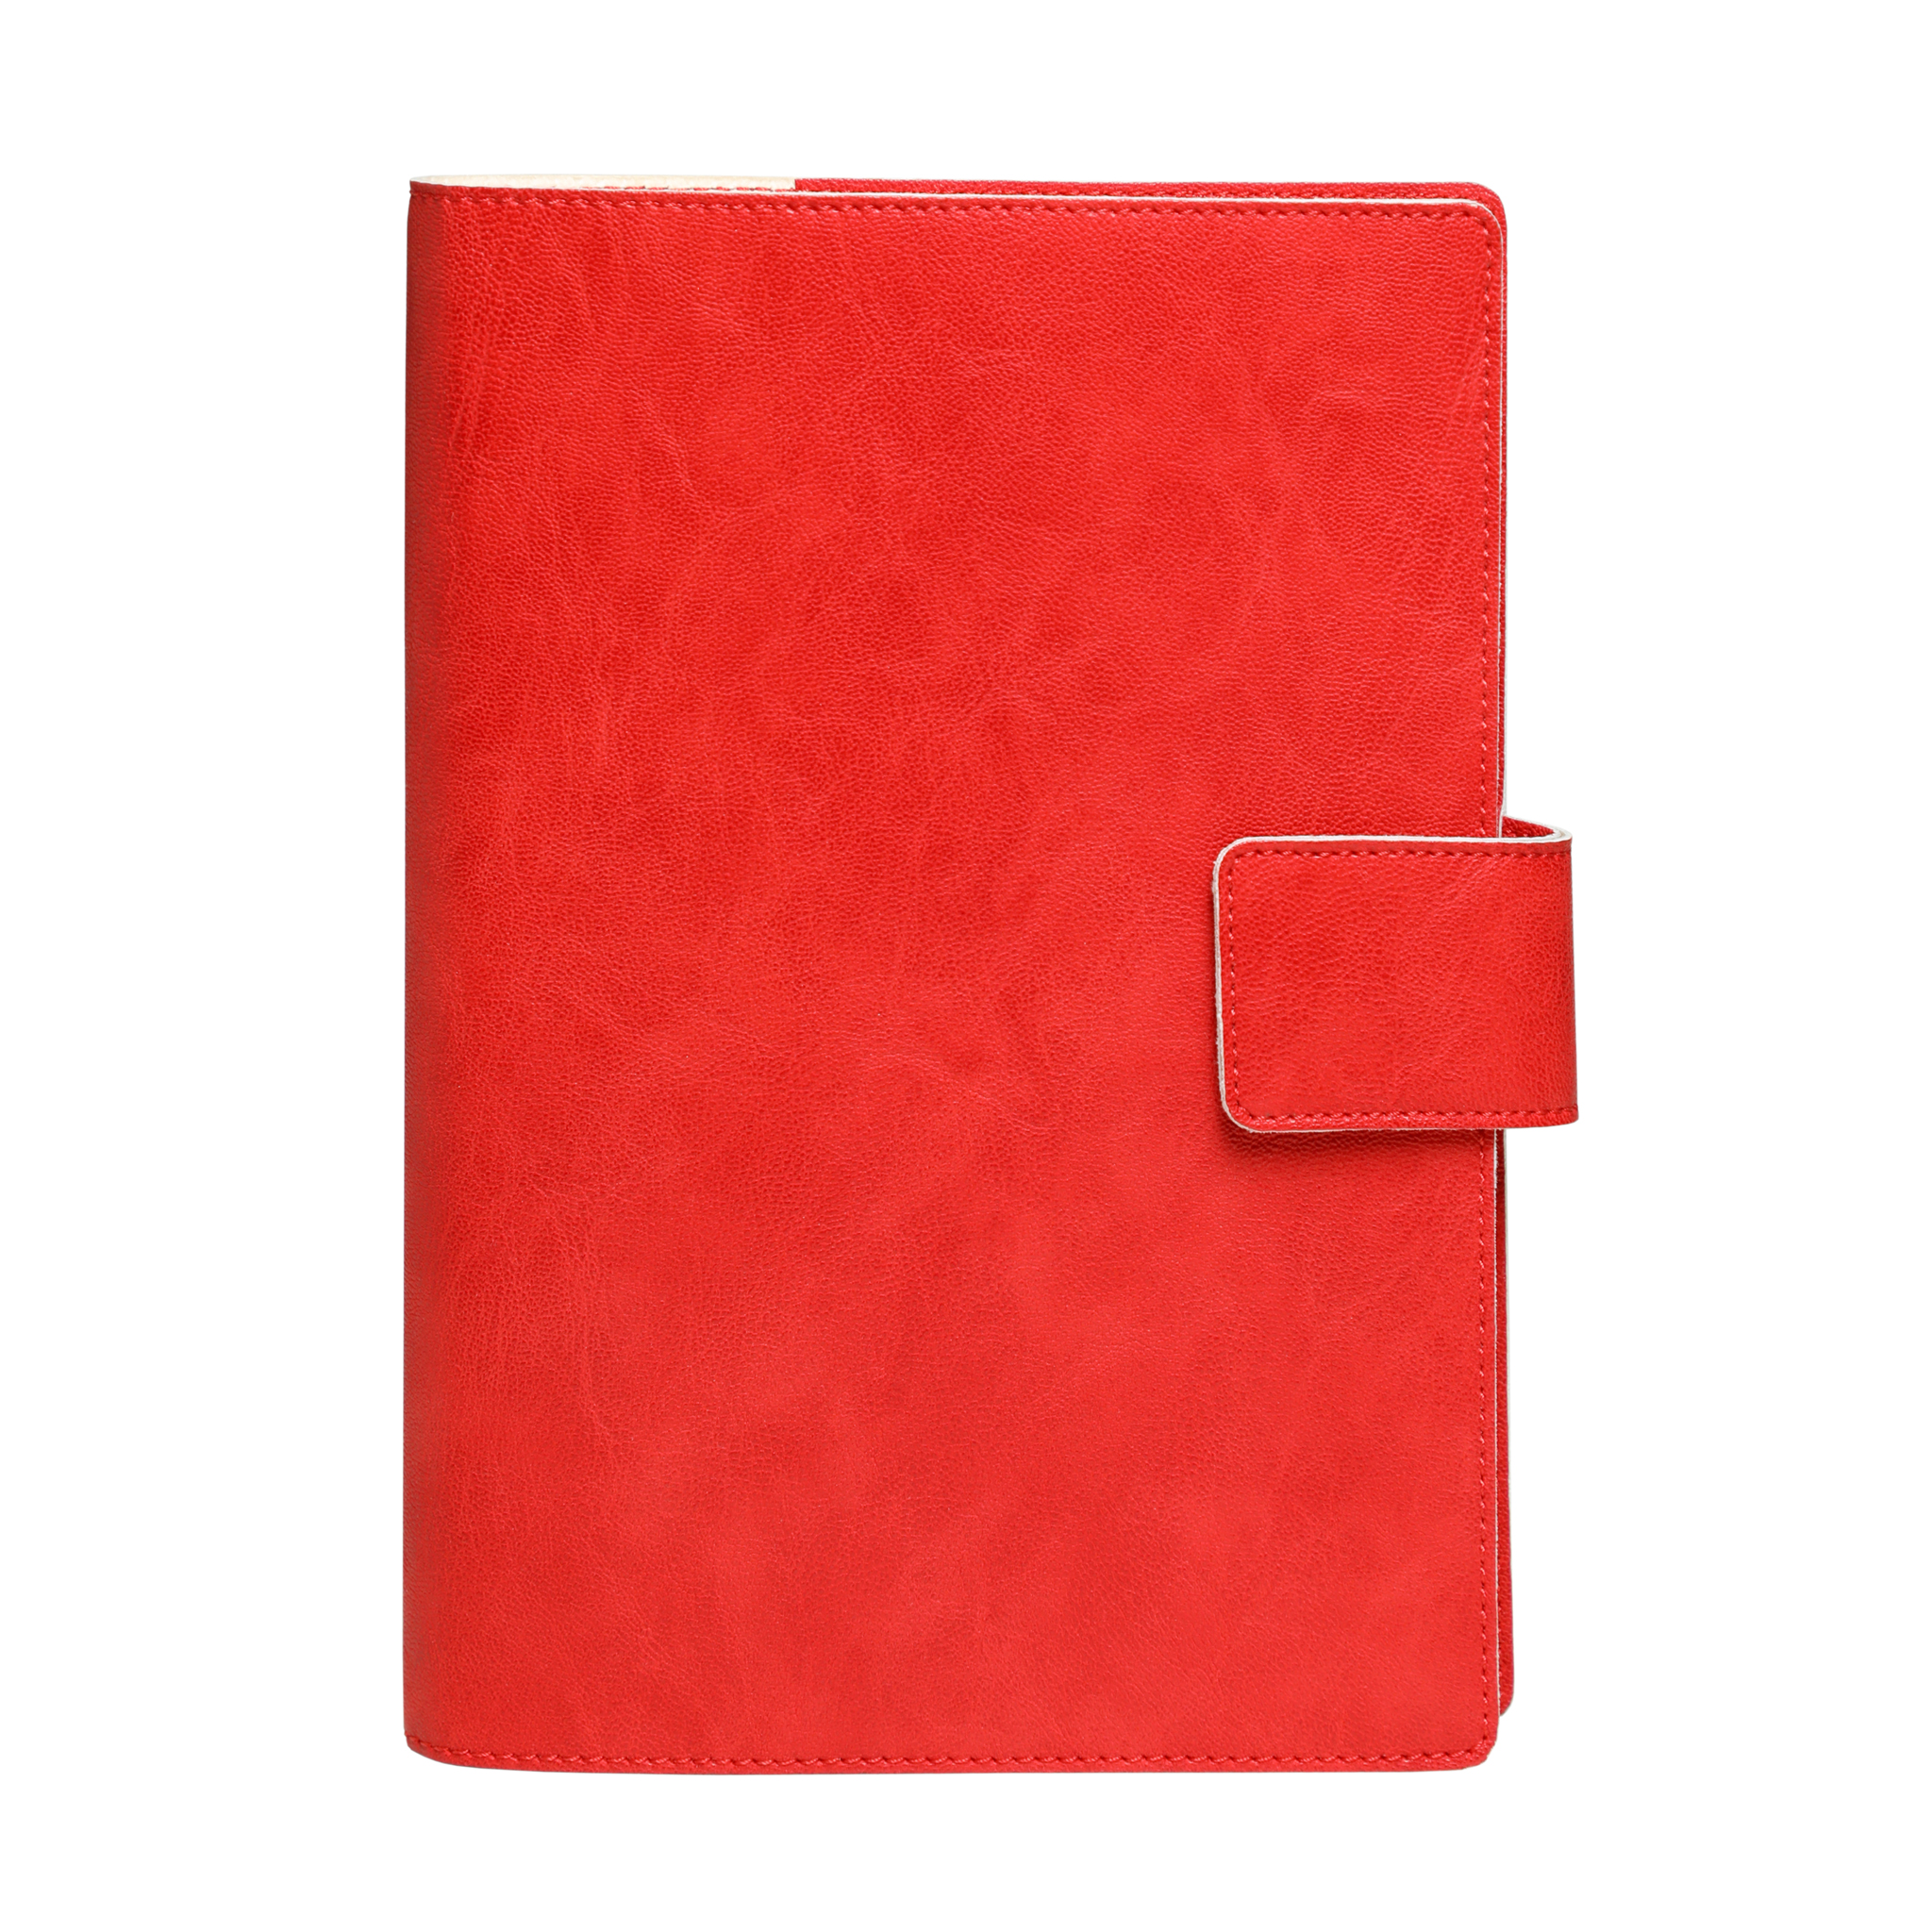 A7042-Red - Pescara Journal with Snap